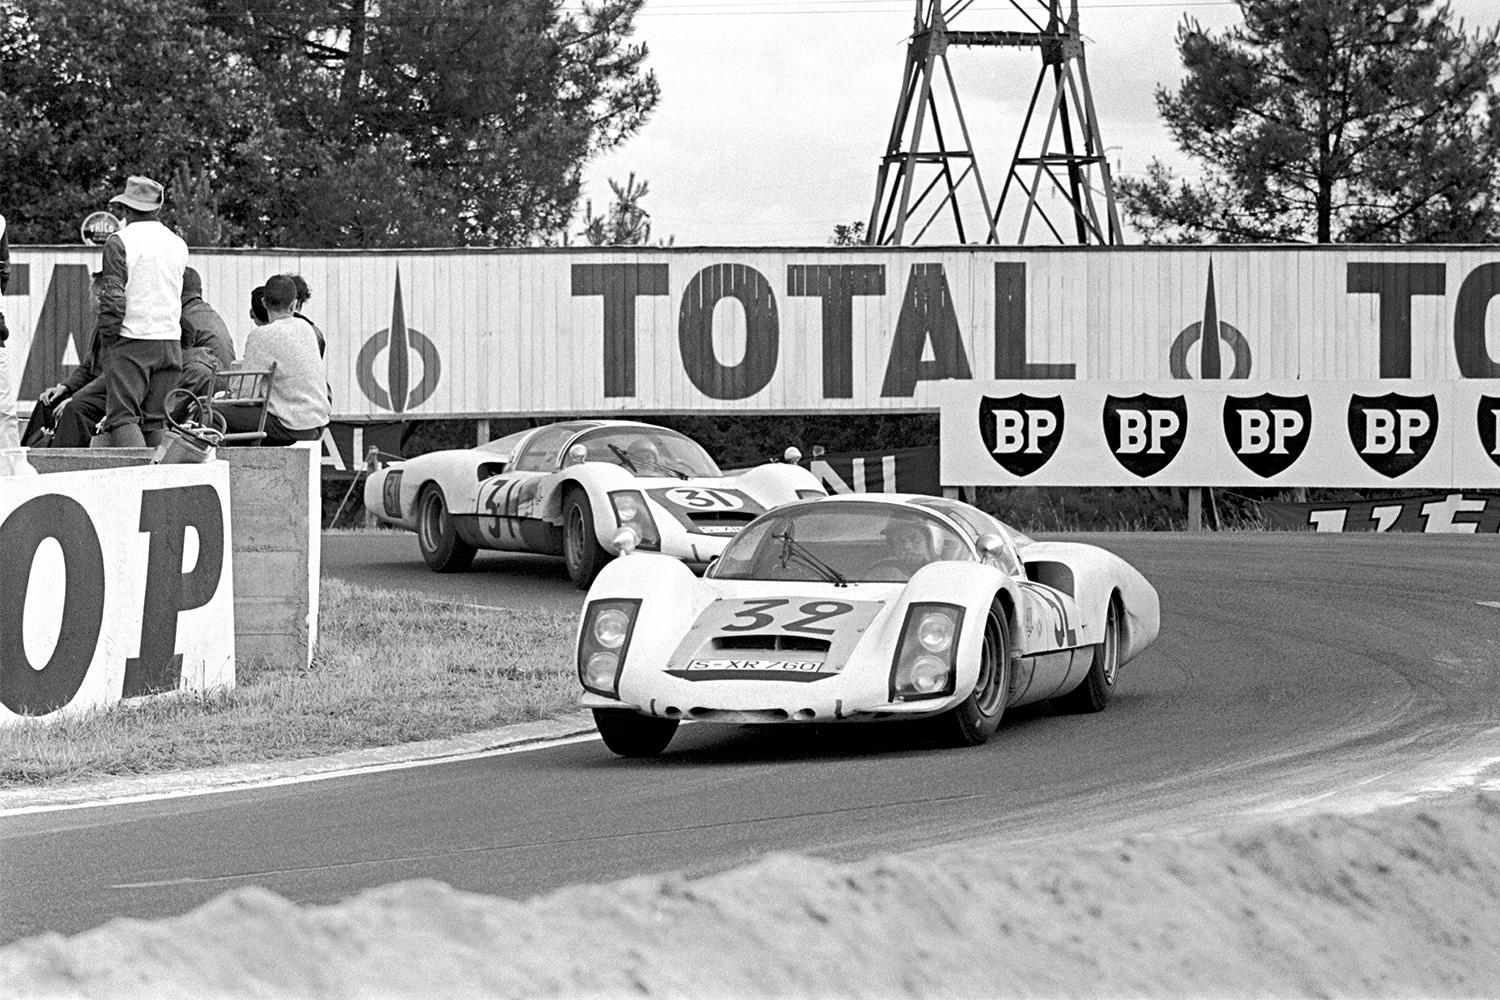 <strong>Porsche 906 LH</strong><br><strong>Car numbers: </strong>30, 31 and 32<br>While everyone remembers the rivalry between Ford and Ferrari, and the top three spots that went to the former, the next four finishers were all from team Porsche. “LH” stands for Langheck, or Longtail in English. These three longer 906s were driven by Jo Siffert and Colin Davis (No. 30), Hans Herrmann and Herbert Linge (No. 31) and Udo Schutz and Peter de Klerk (No. 32).